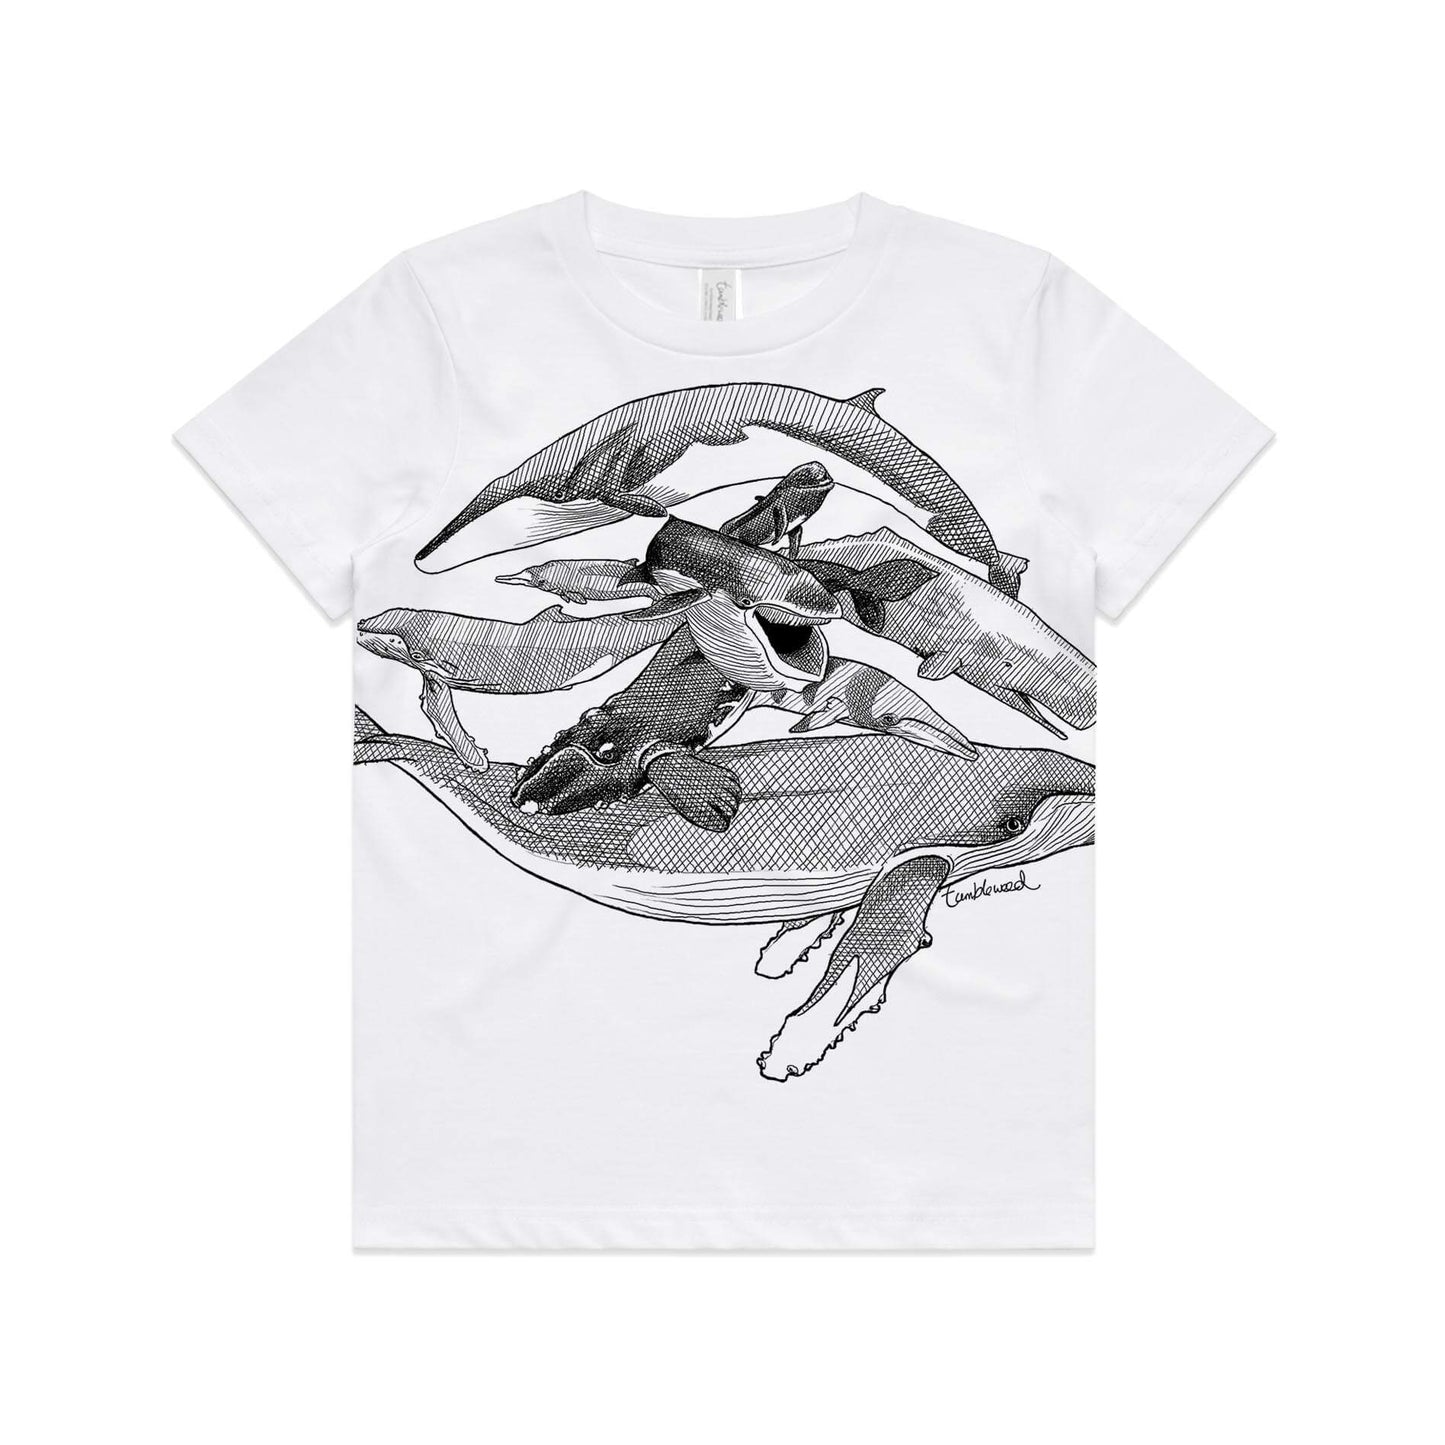 White, cotton kids' t-shirt with screen printed Kids whales design.